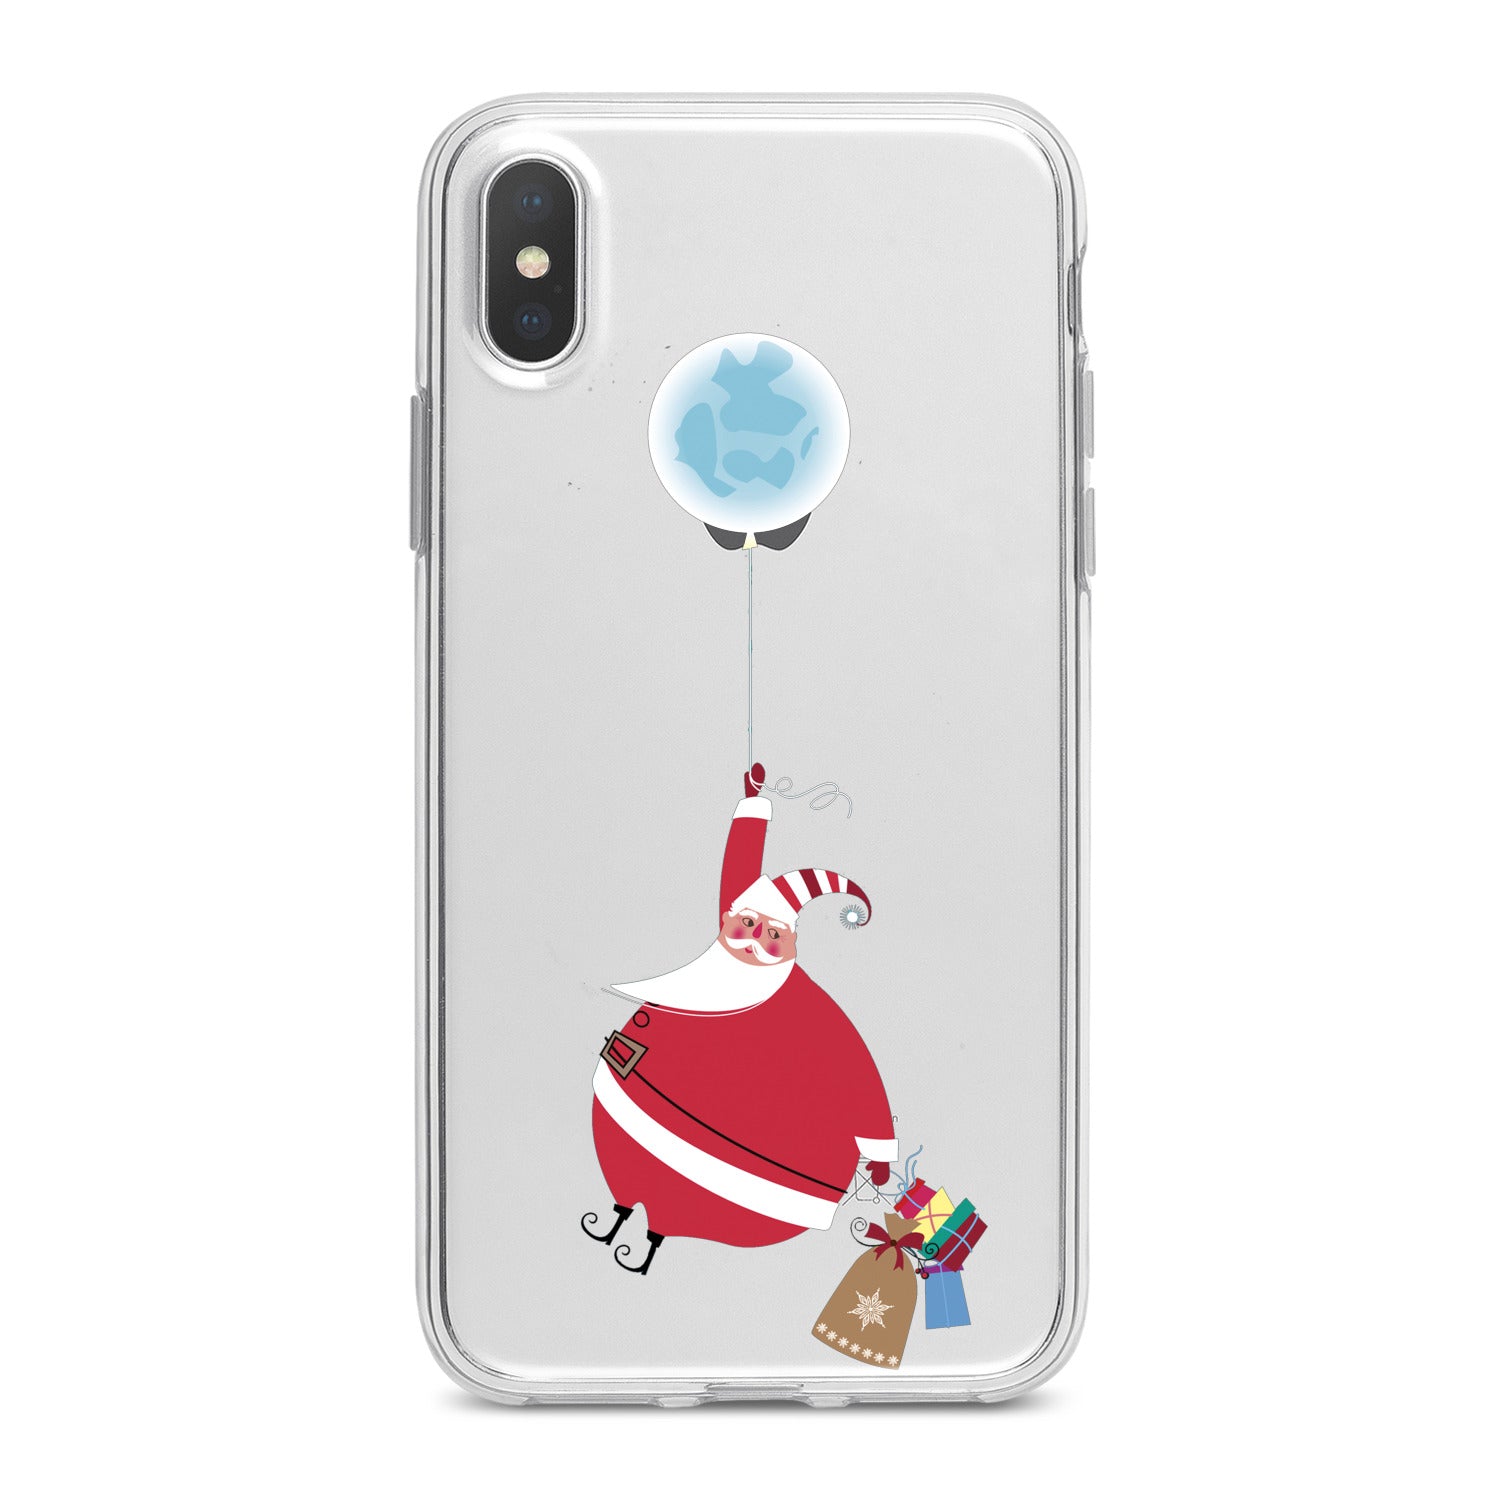 Lex Altern Funny Santa Claus Phone Case for your iPhone & Android phone.